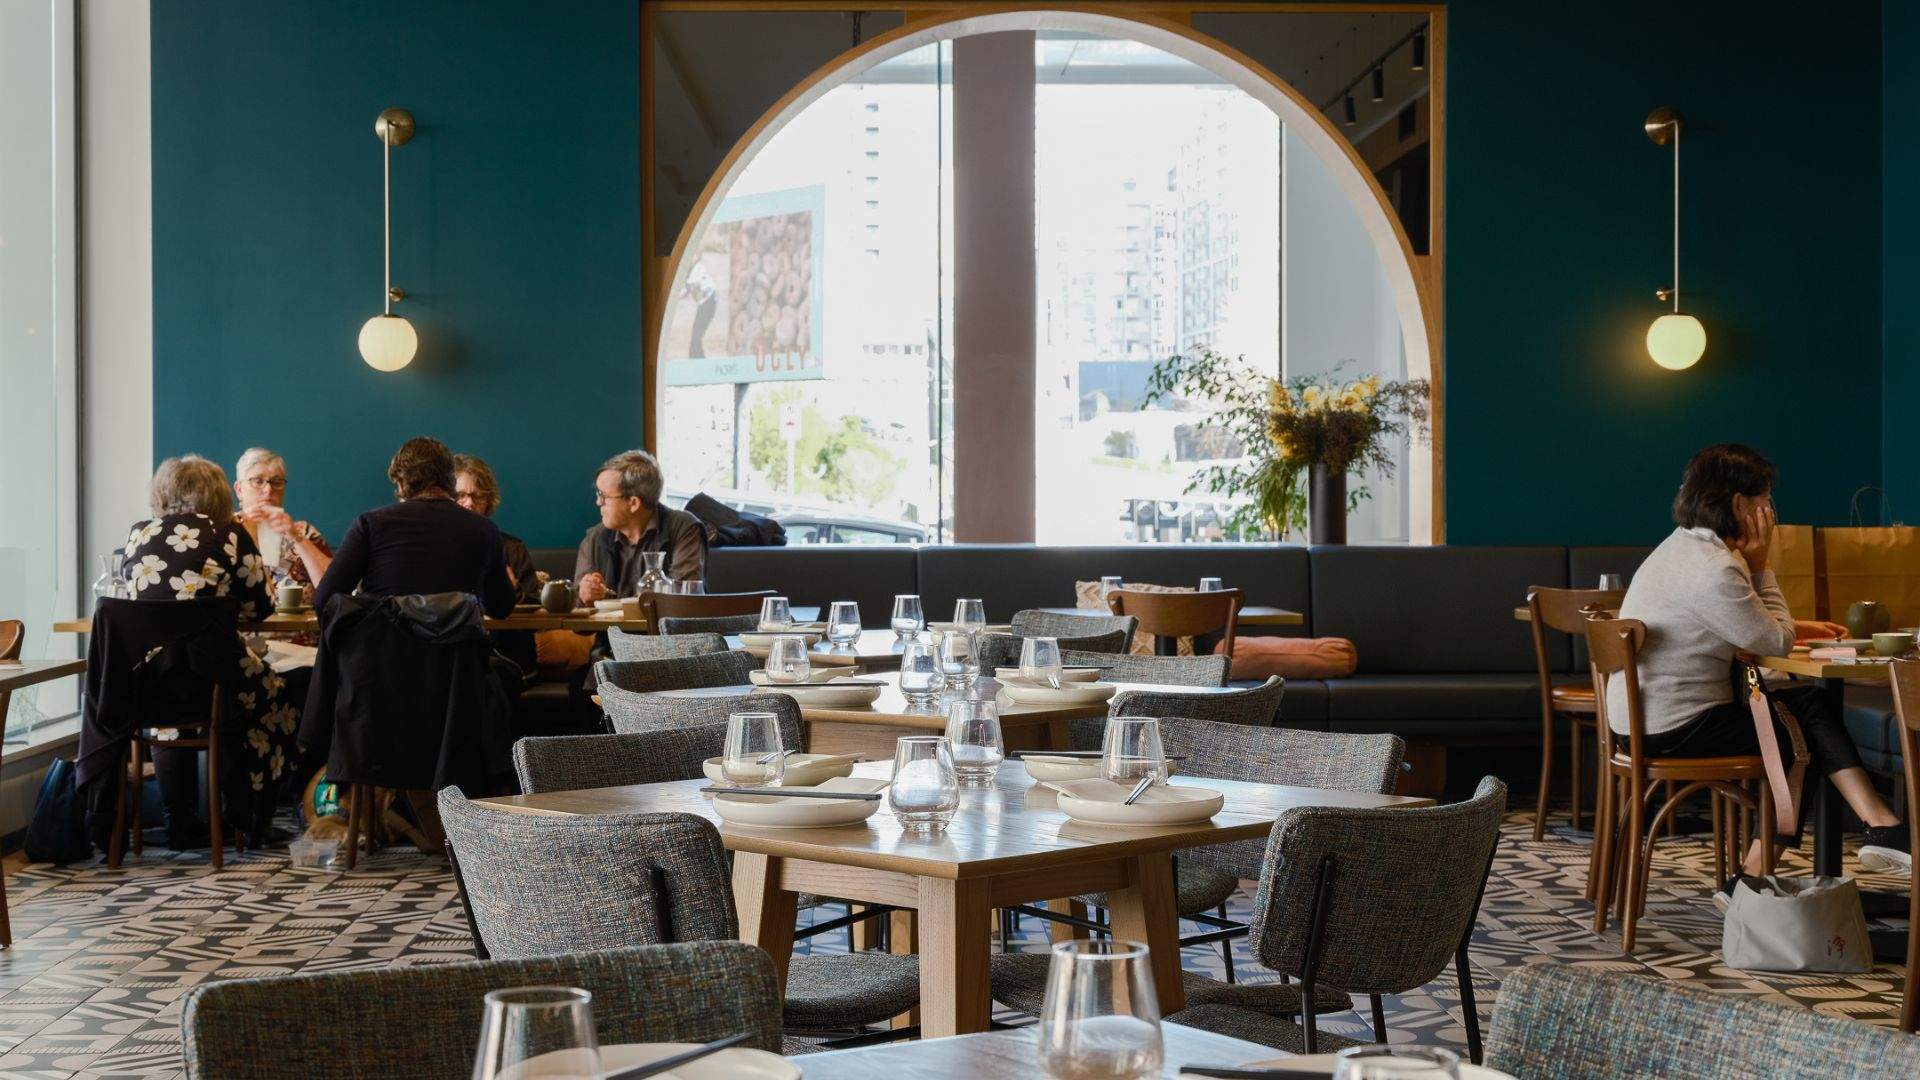 Auckland Restaurant Month Returns This August with Speciality Menus, Masterclasses and Events